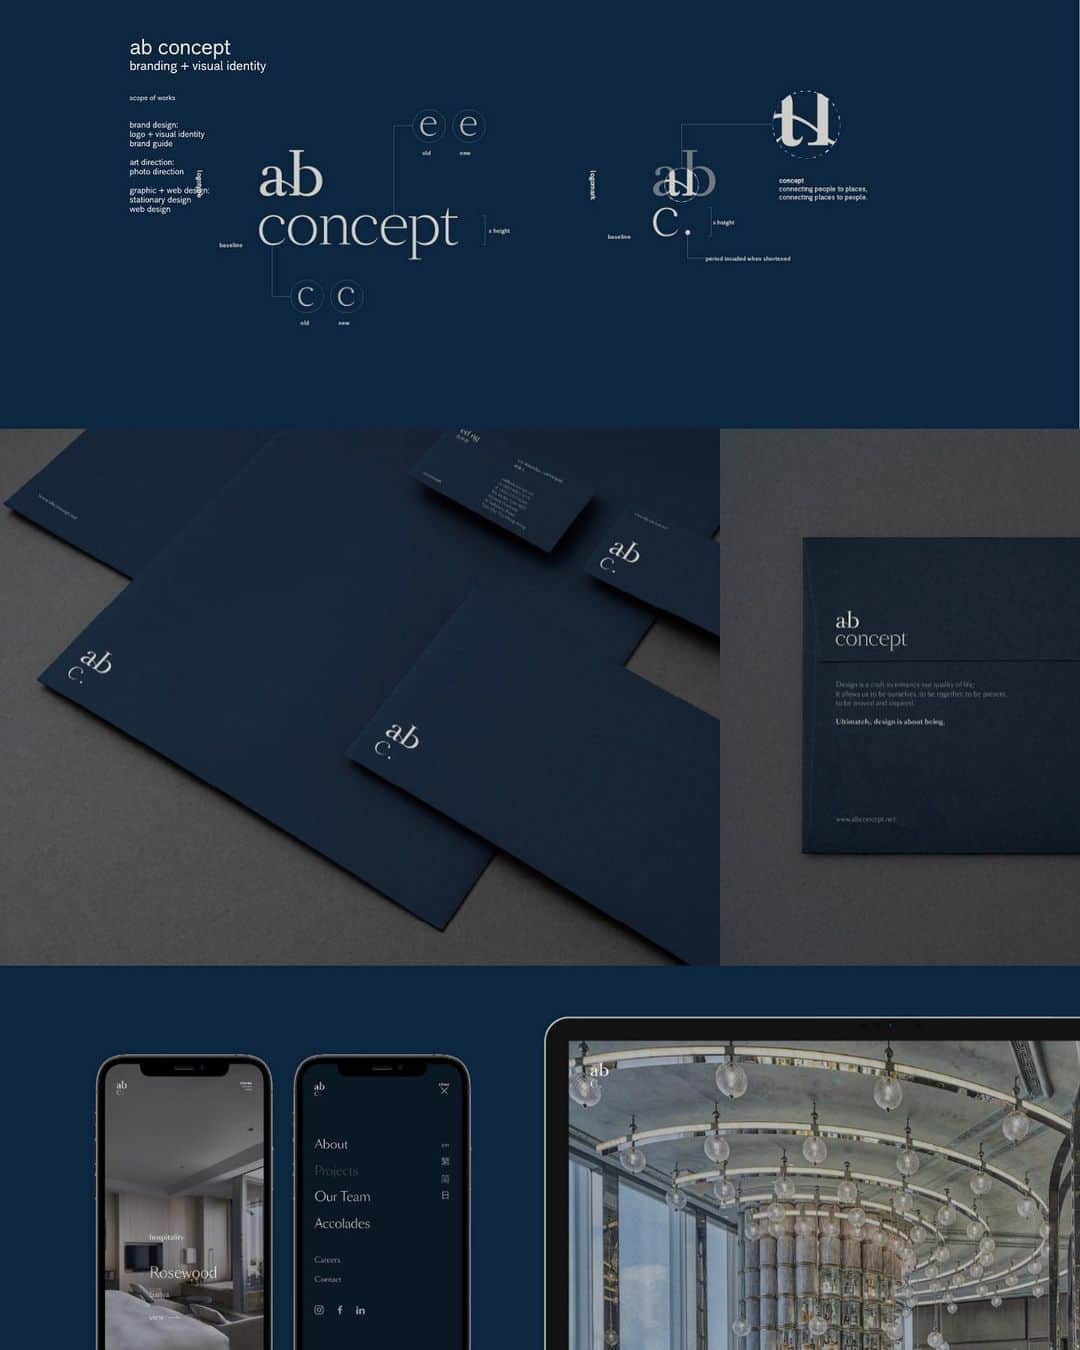 川上俊さんのインスタグラム写真 - (川上俊Instagram)「[new works]   ab concept ltd. @ab_concept   corporate branding + visual identity  brand design: logo + visual identity brand guide art direction: photo direction graphic + web design: stationary design web design  We were approached by architect Terence Ngan and interior designer Ed Ng to rebrand their design studio ab concept founded in 1999 in Hong Kong. We were in charge of rebranding their C.I. (Corporate Identity), encompassing the logo, V.I., web design, and stationary design.  ab concept has been a creative partner to leading hospitality brands around the world for over 20 years, providing comprehensive interior design and creative direction as well as furniture, lighting, and textiles designs. Inspired by their mantra of, “Ultimately, design is about being.”, our goal was to create a brand identity that brings in elements of a human-touch while maintaining the timelessness present in ab concept’s work.  By connecting the initials of "about being", the logo expresses the various connections that ab concept values—craft and industry, scale and intimacy, people and places.  The brand colors of deep blue and light gray represents both elegance and modernity, while the humanist font, Sang Bleu, ties together this delicate balance to evoke a sense of silent authority. Designed with meticulous attention to every detail, we strive to create a brand design that accompanies ab concept’s journey to a new phase of exploration and maturity.  -- branding : artless Inc. creative direction & art direction: shun kawakami graphic & web design: thomas zimmerman + shinsaku iwatachi web programming : adrien dufond project management : asami kinoshita client: ab concept ltd.  -  P.S. @edng.terencengan  Thanks a lot :)」9月9日 13時04分 - shunkawakami